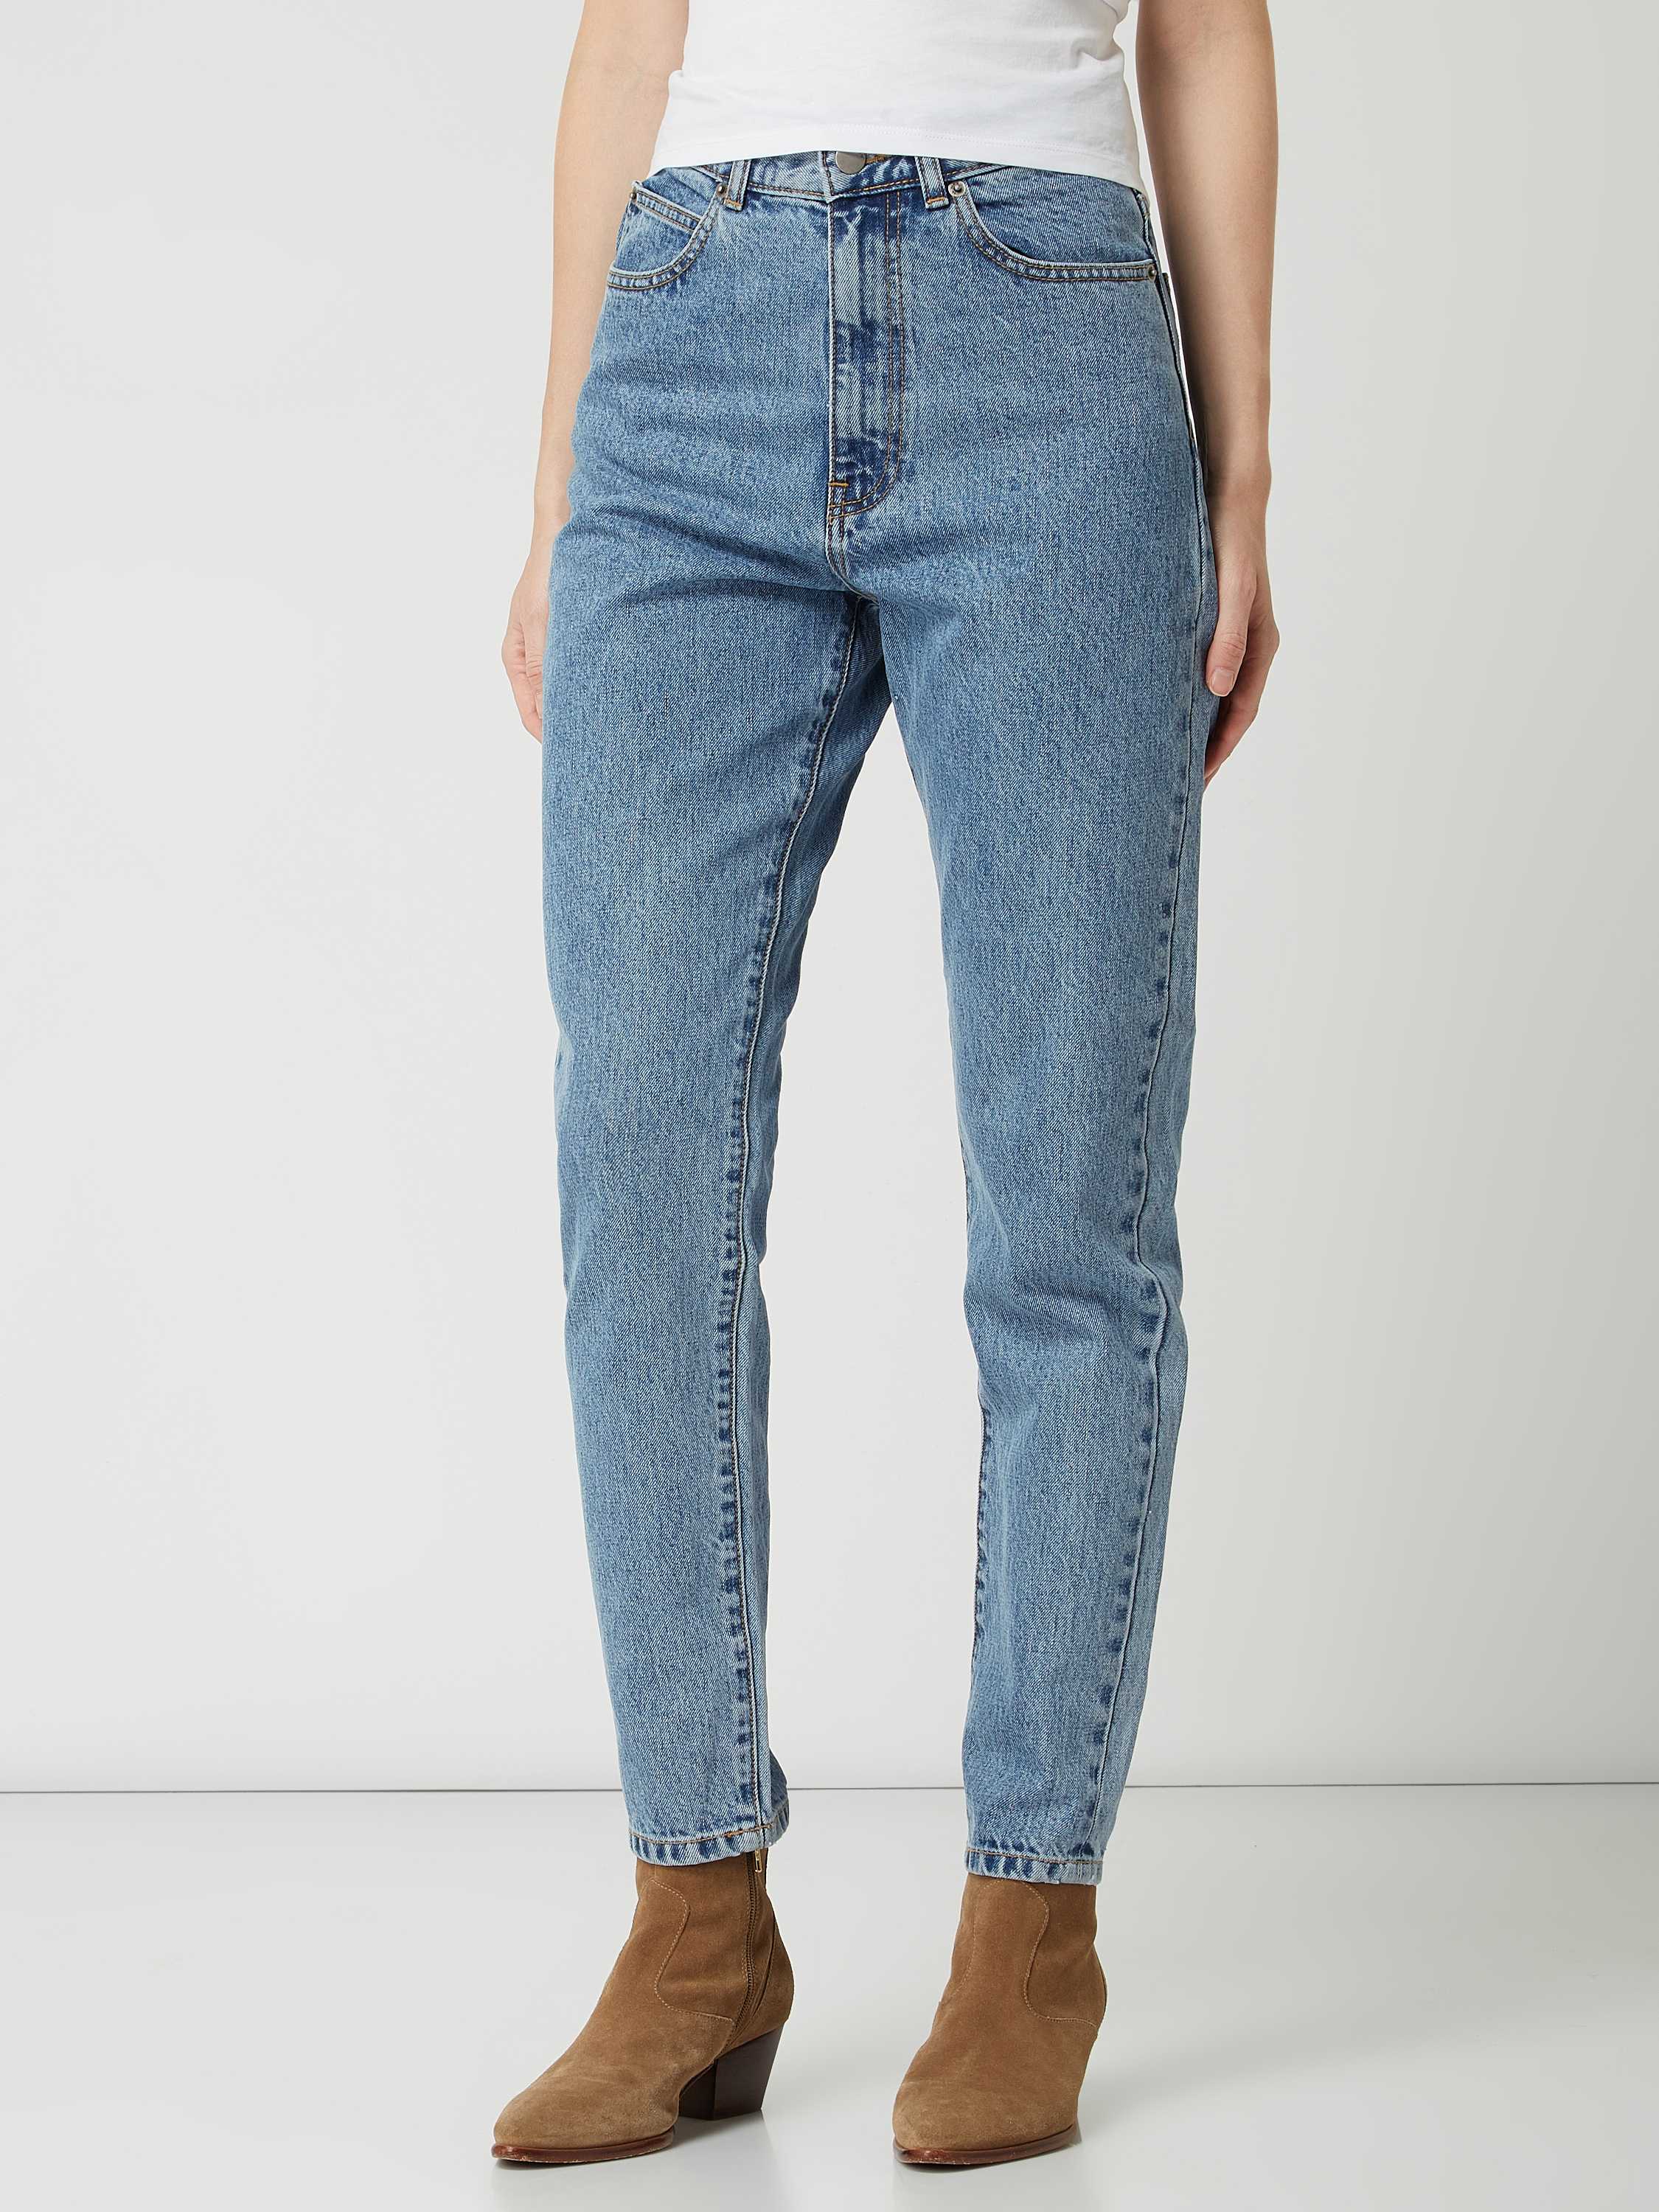 Dr Denim Tall Nora high rise mom jeans in cream